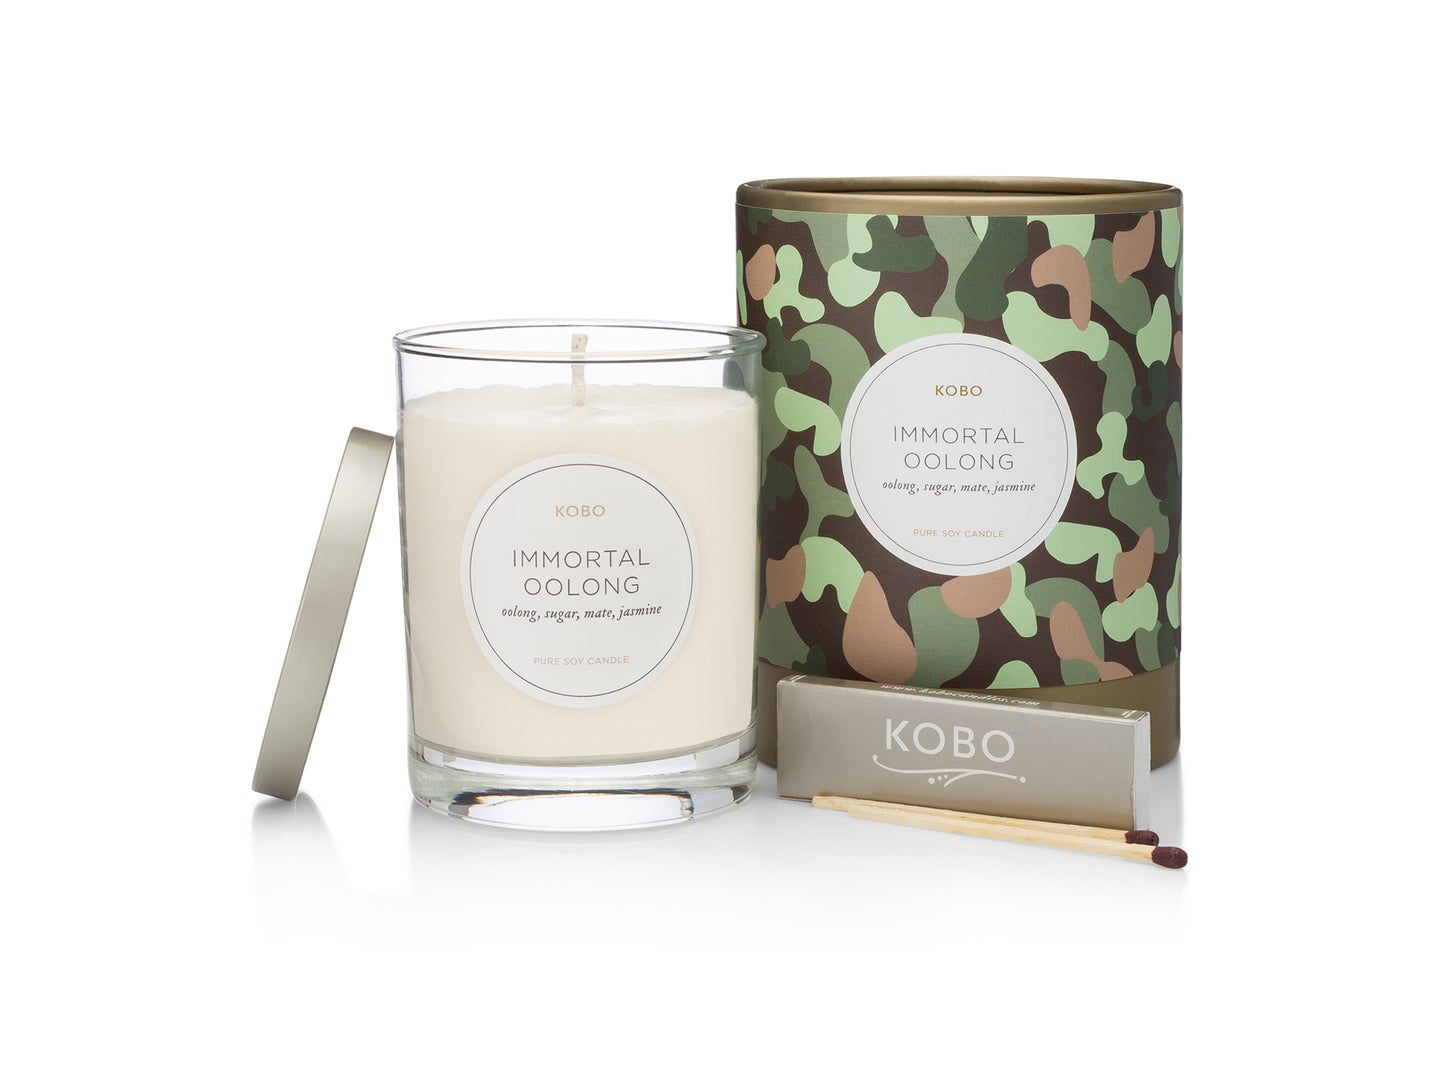 Immortal Oolong Camo 11 oz Pure Soy Candle